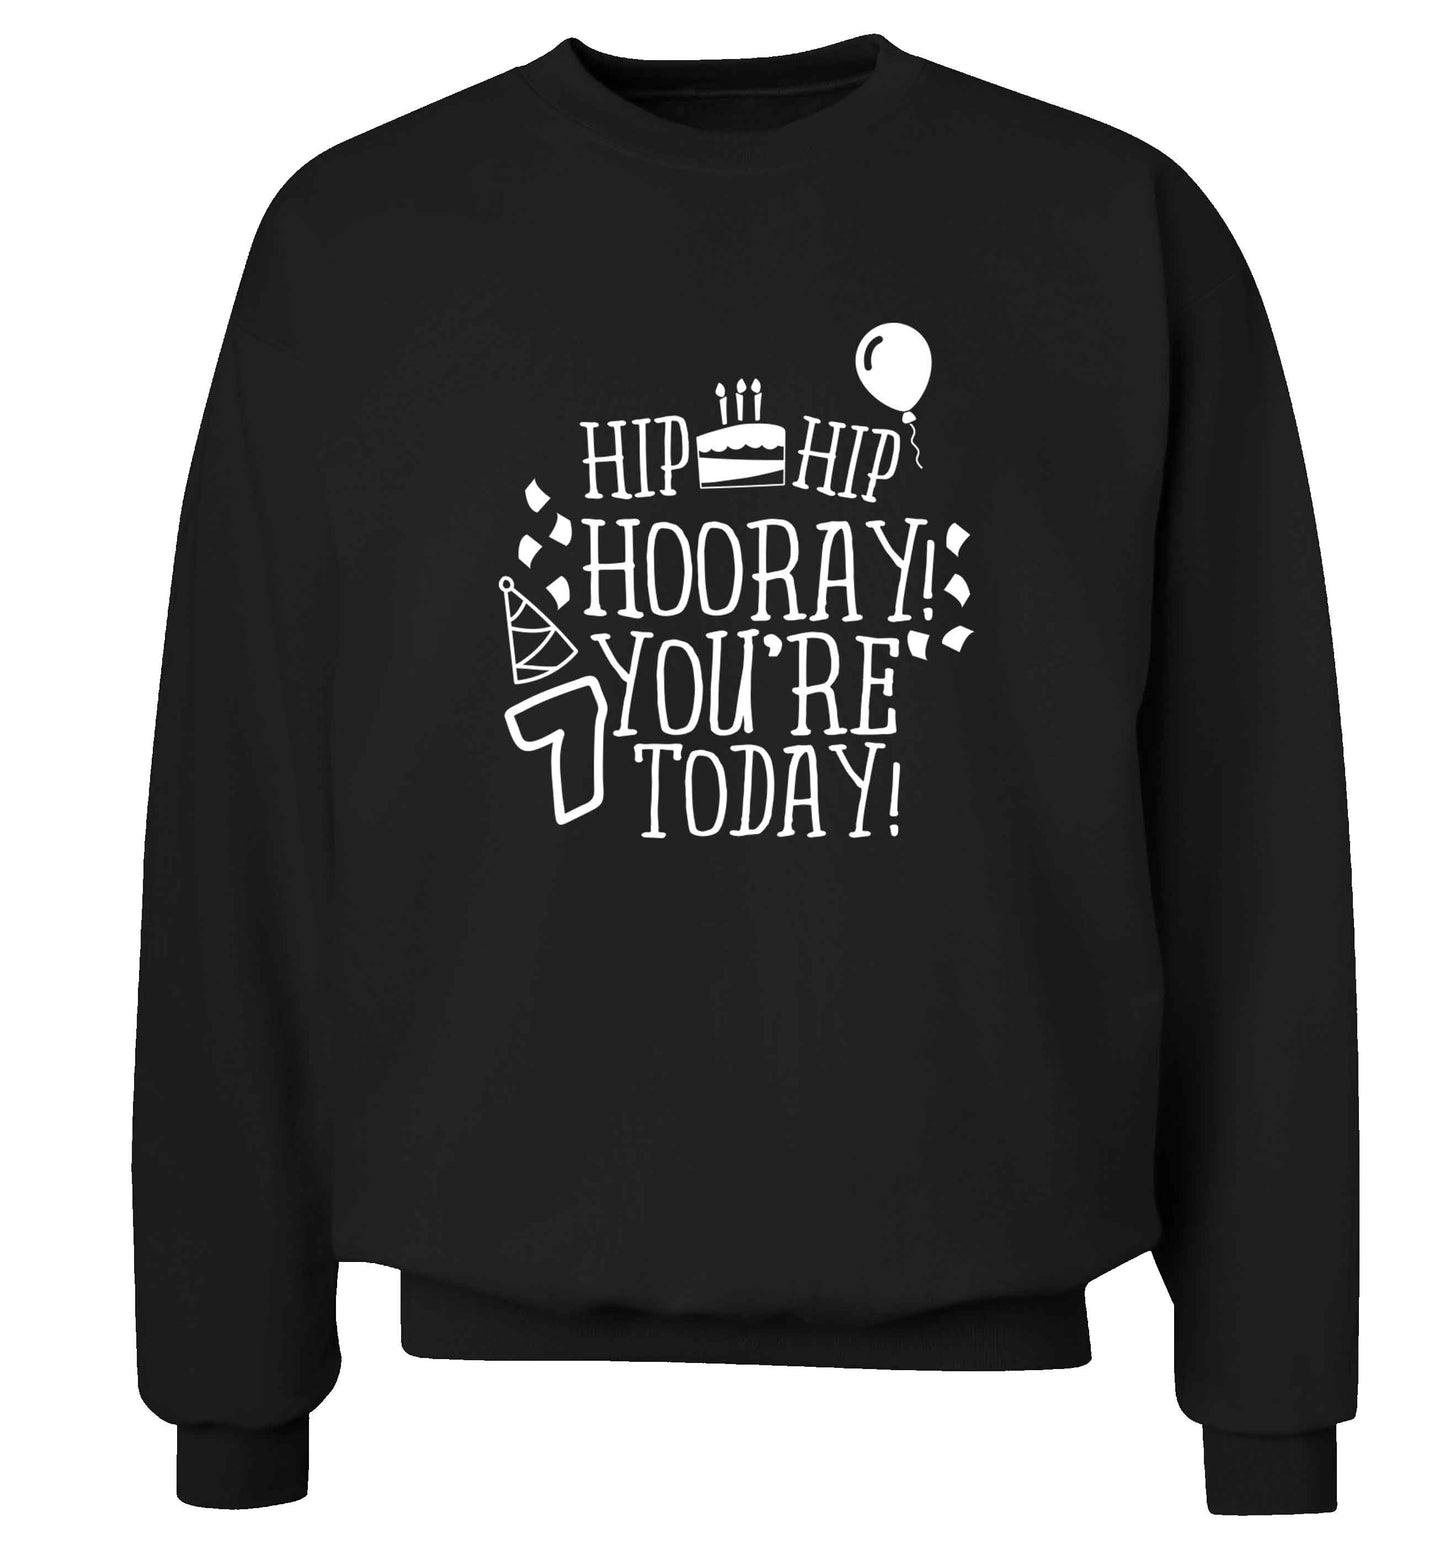 Hip hip hooray you're seven today! adult's unisex black sweater 2XL